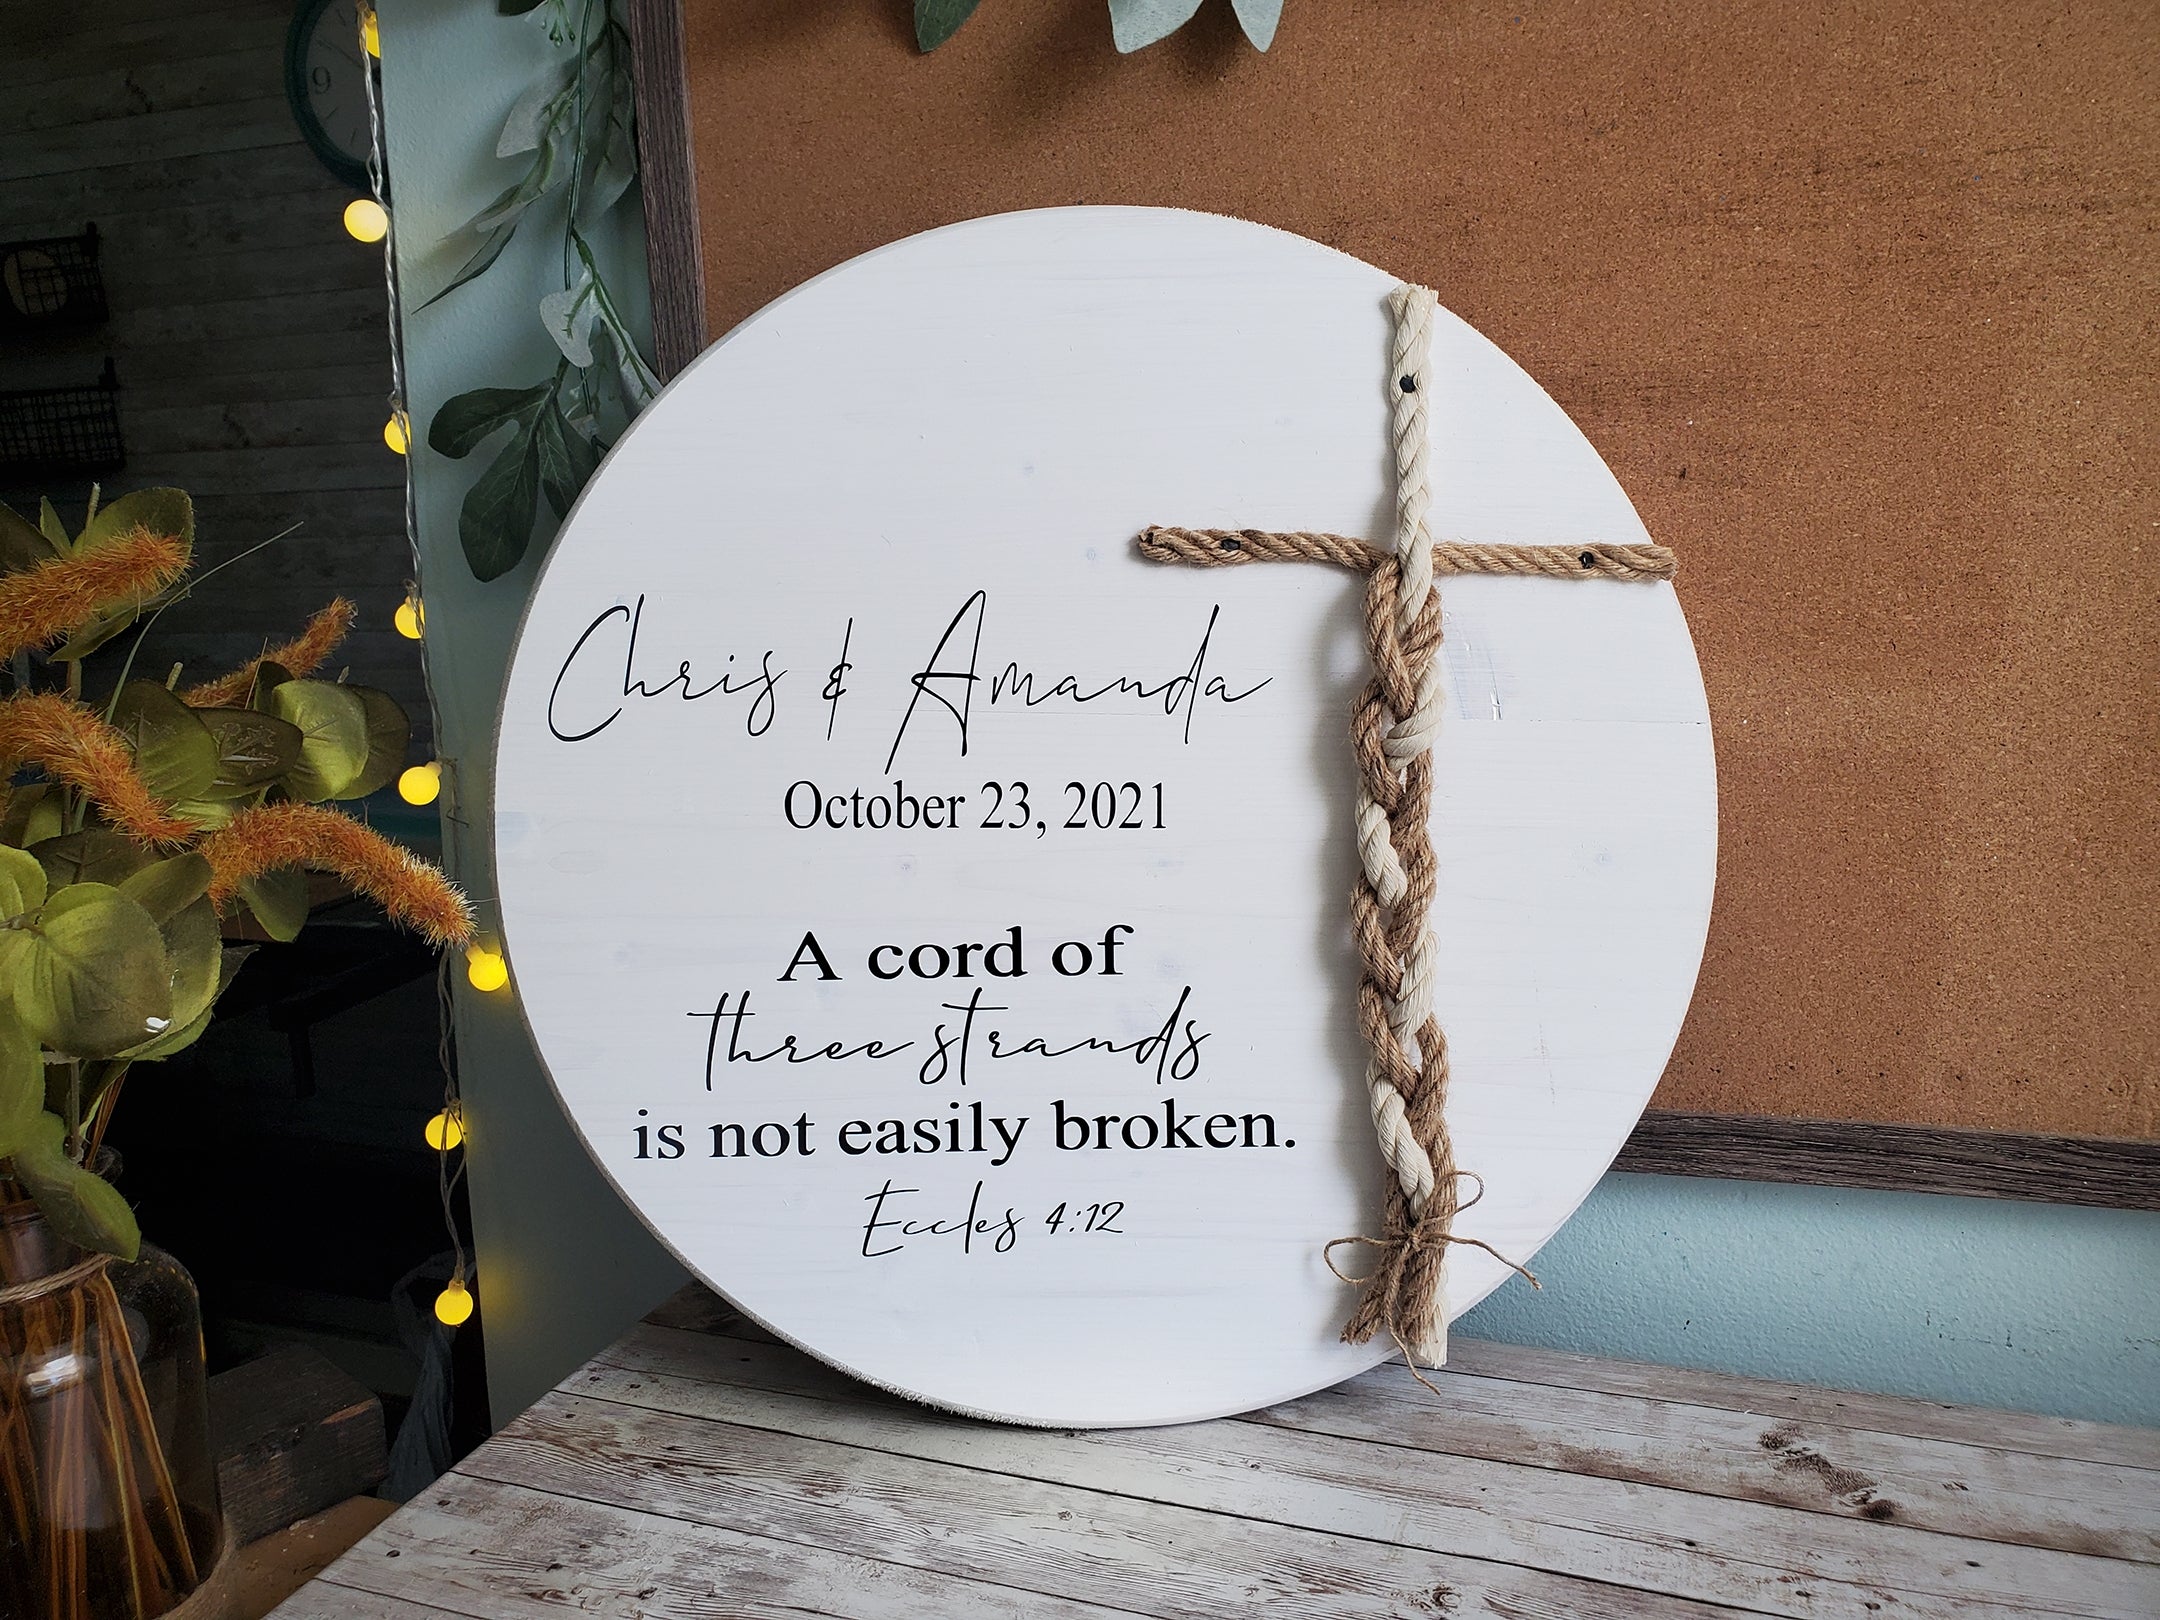 Whitewashed Wedding Sign, Round Unity Sign, A Cord of Three Strands Is Not Easily Broken, Unity Ceremony, 3 cords wedding